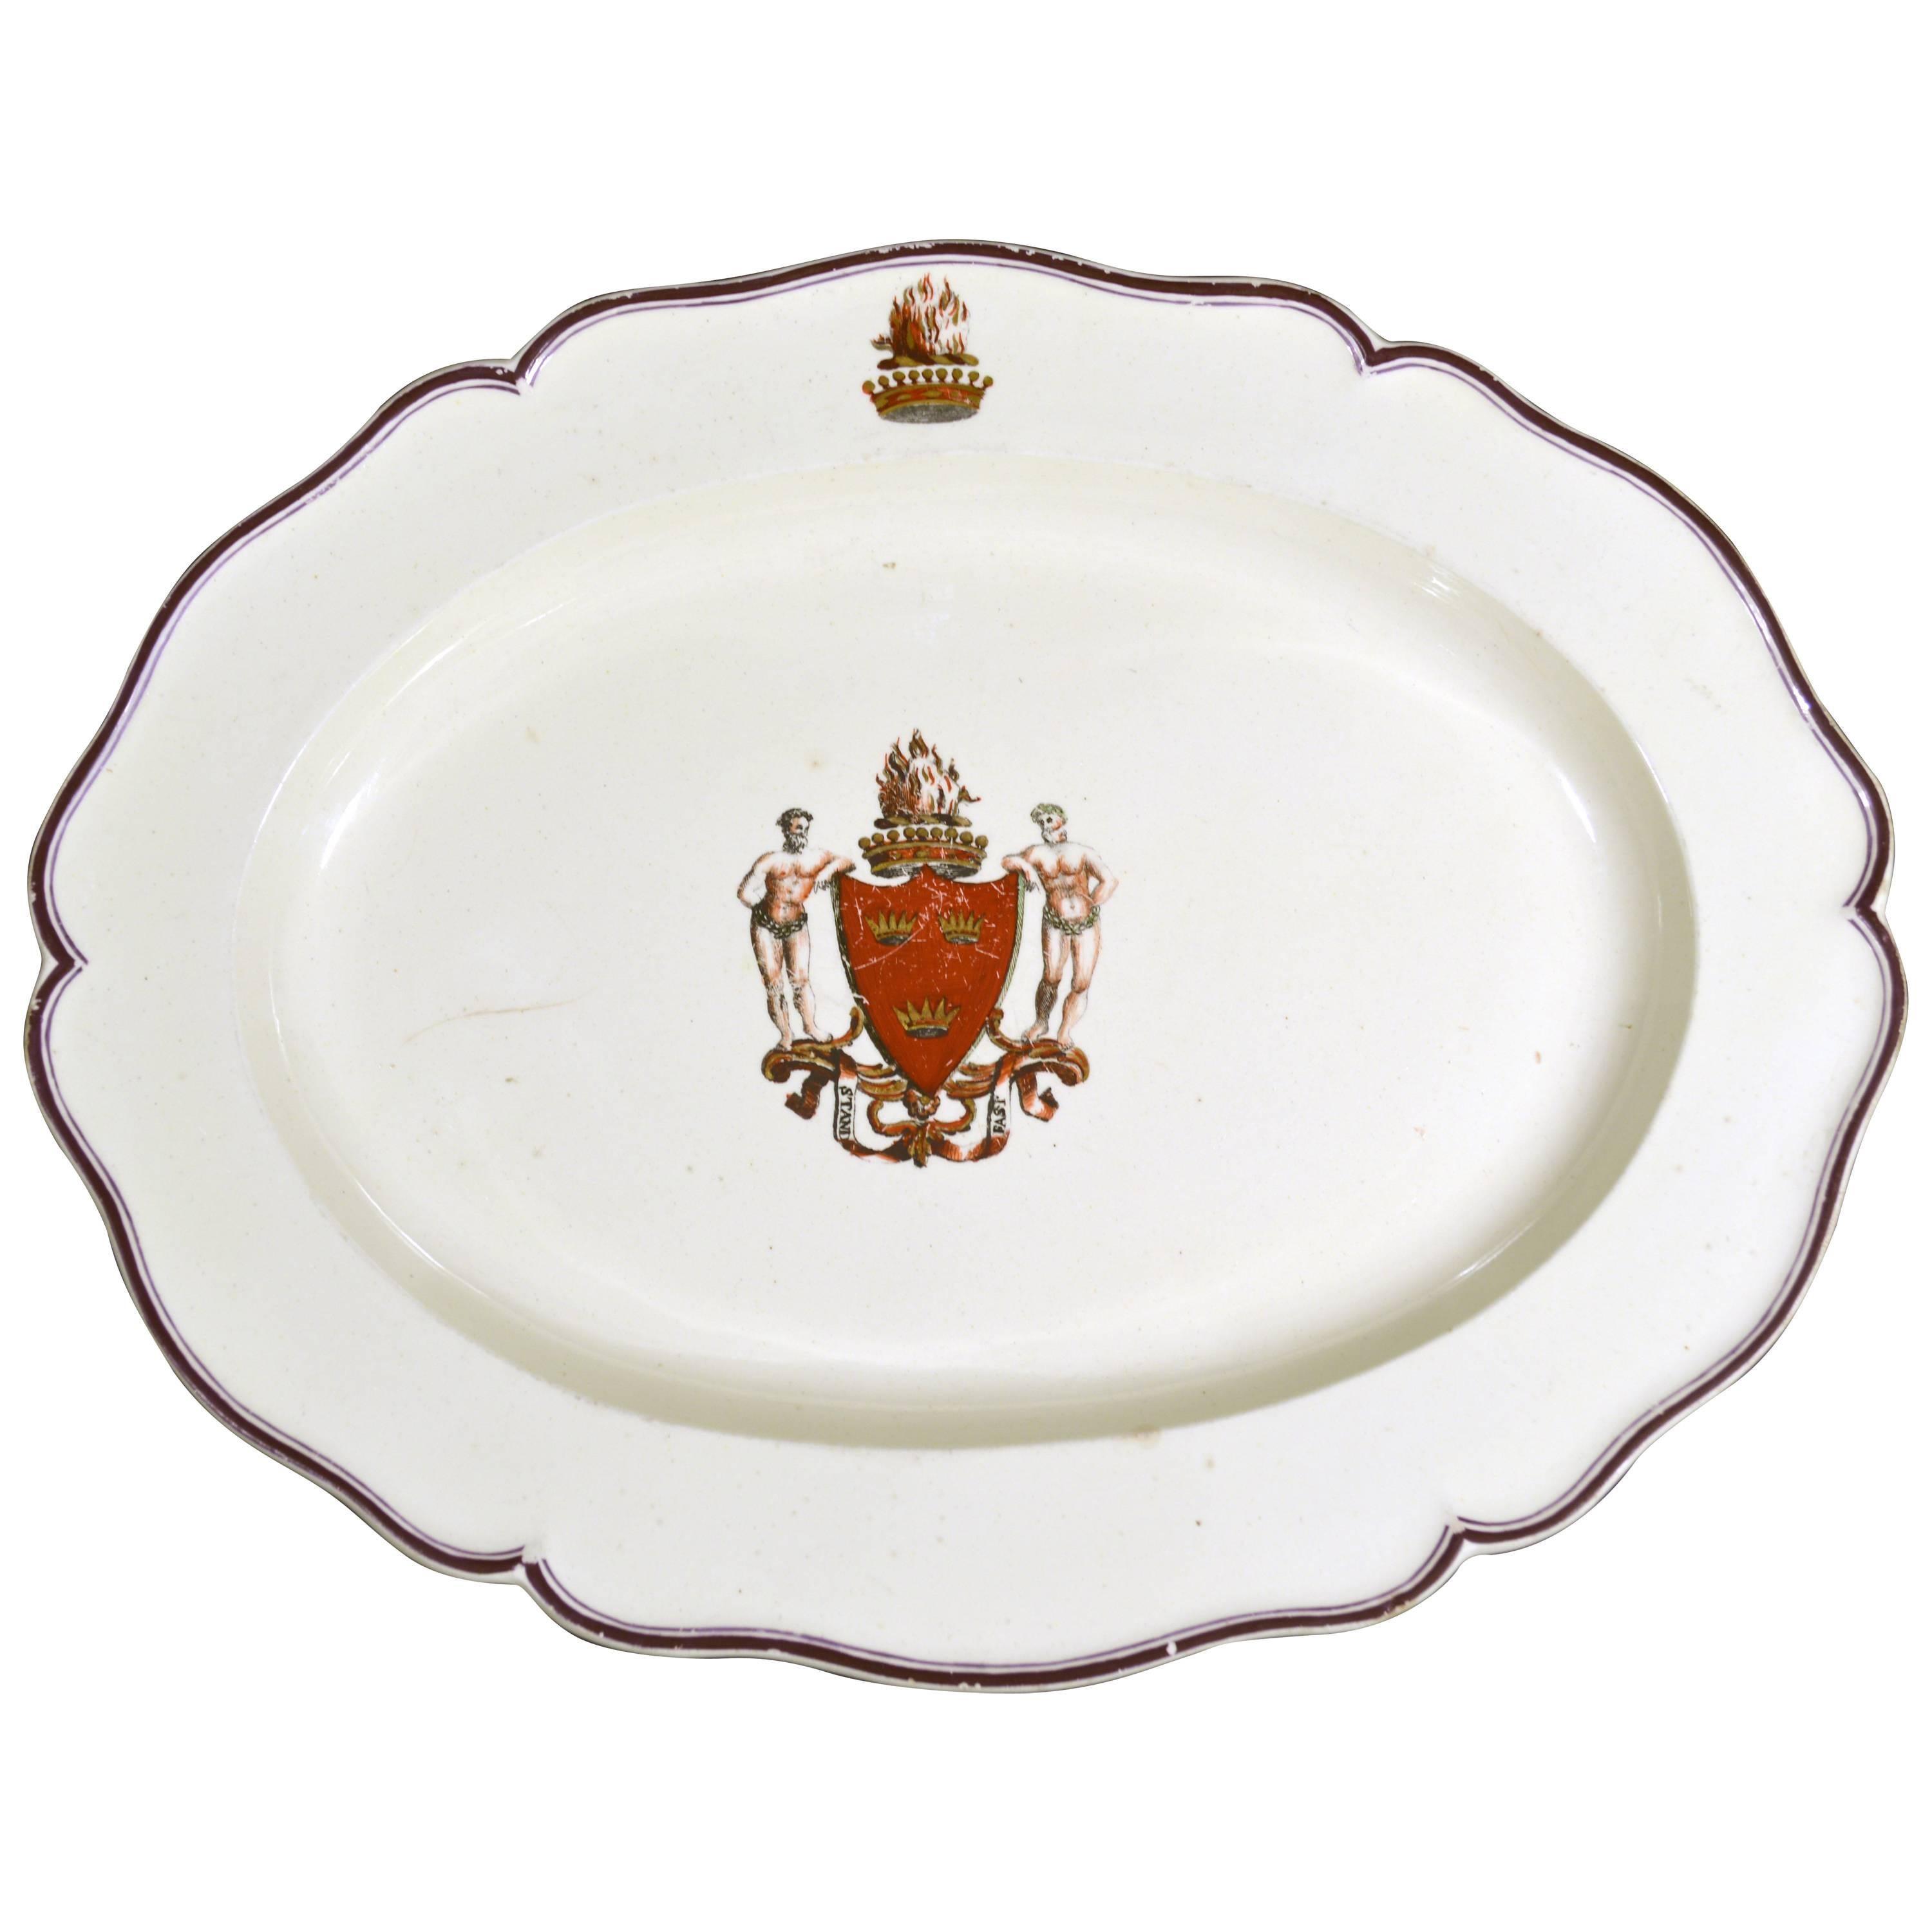 Creamware armorial dish, 
Possibly Melbourne,
Arms of grant,
circa 1800.

The large dish with a puce band on the border and a central coat of arms and a crest to the upper border. The arms are of the chief of the Grant's.

Dimensions: 13 3/4